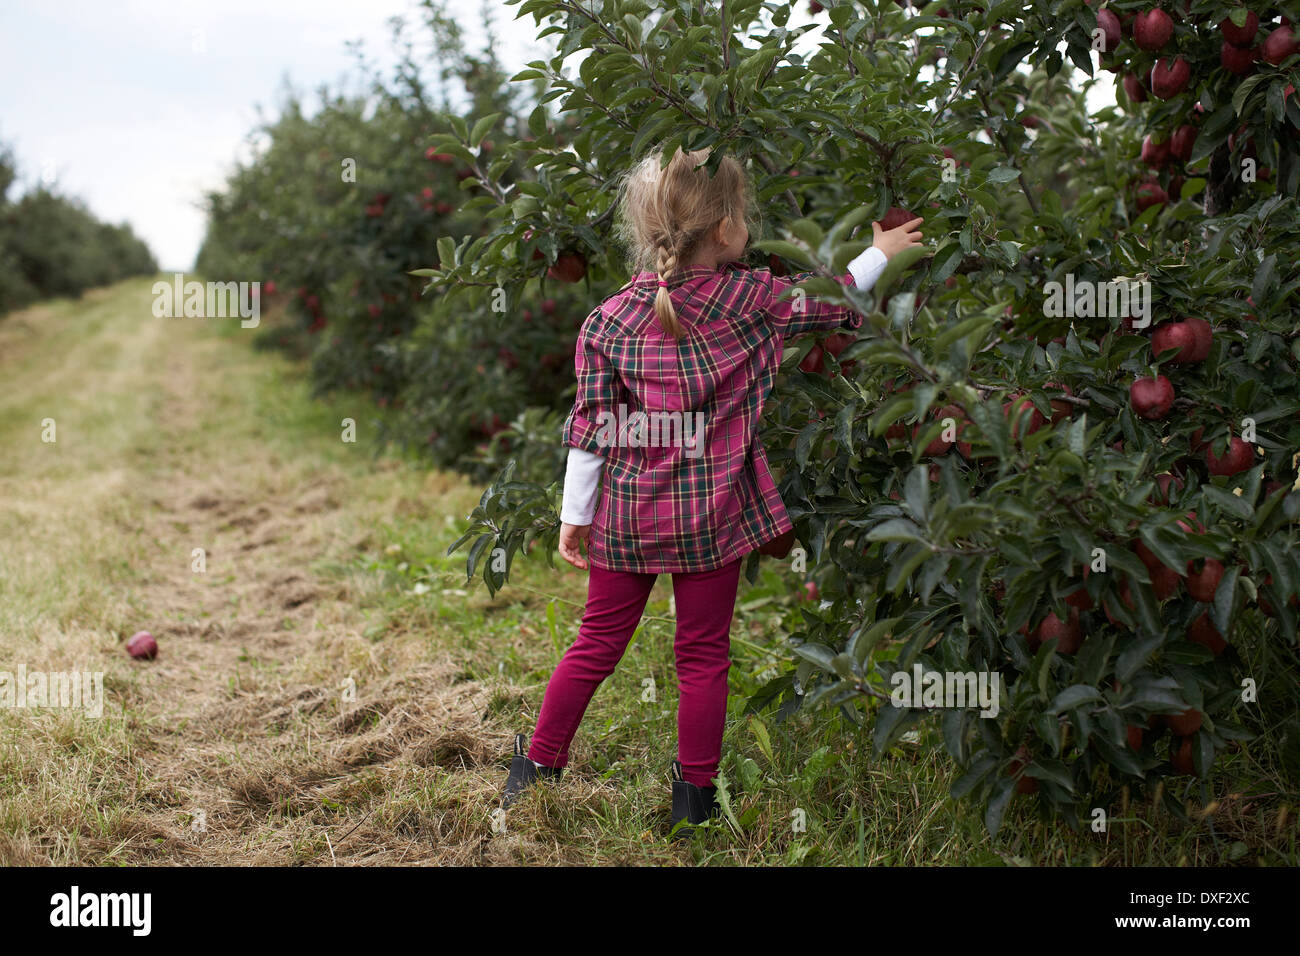 Girl Picking Apples in Orchard, Milton, Ontario, Canada Stock Photo